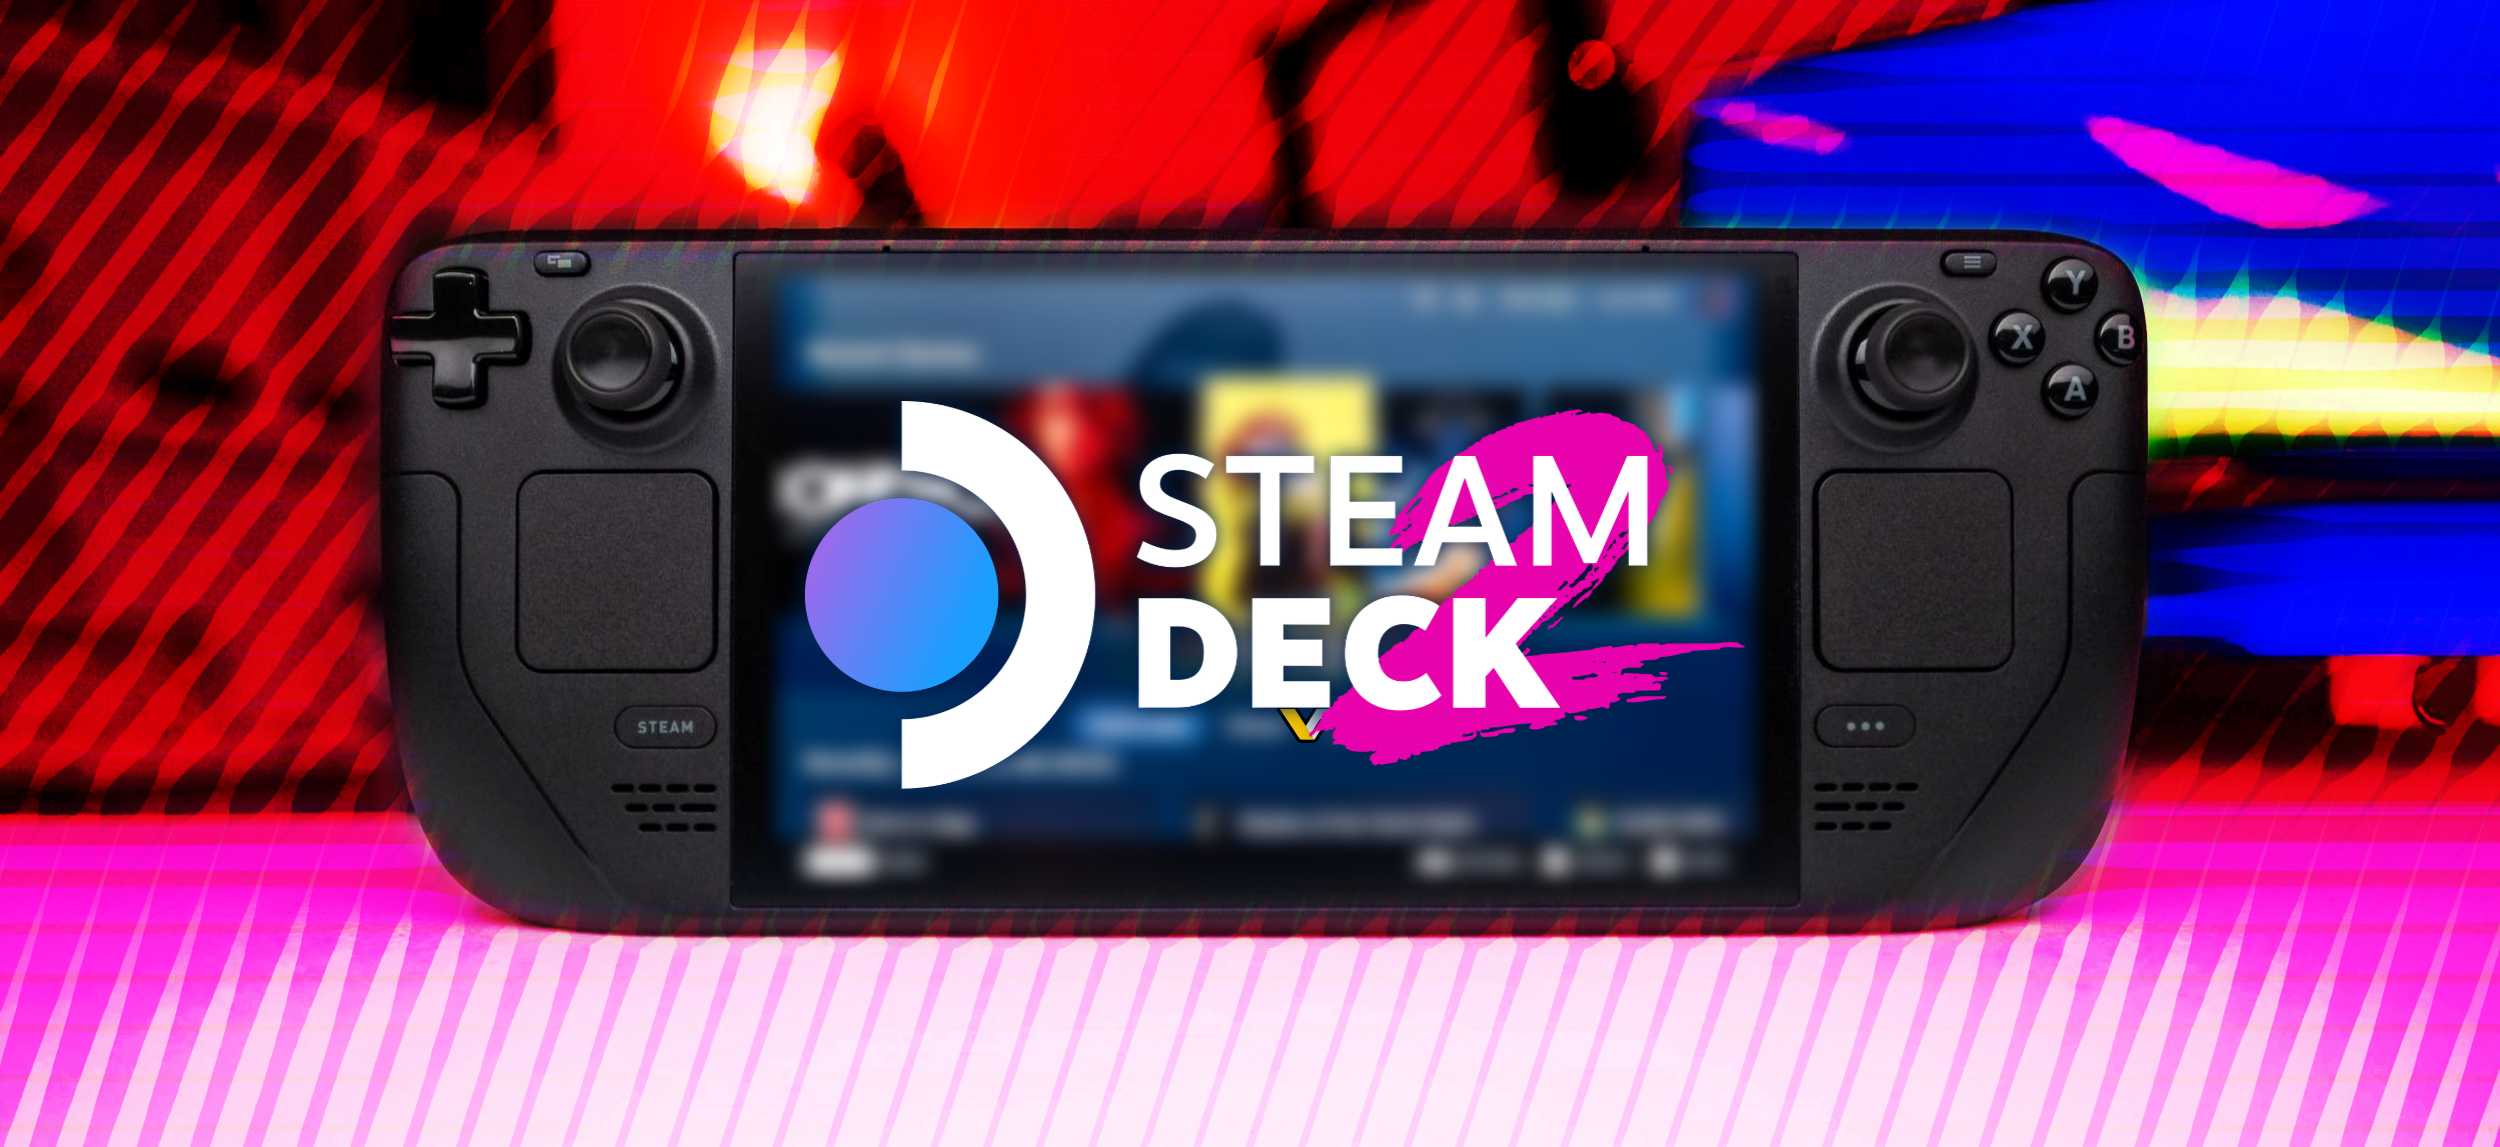 Steam Deck, Valve handheld for PC games, announced for December release -  Polygon